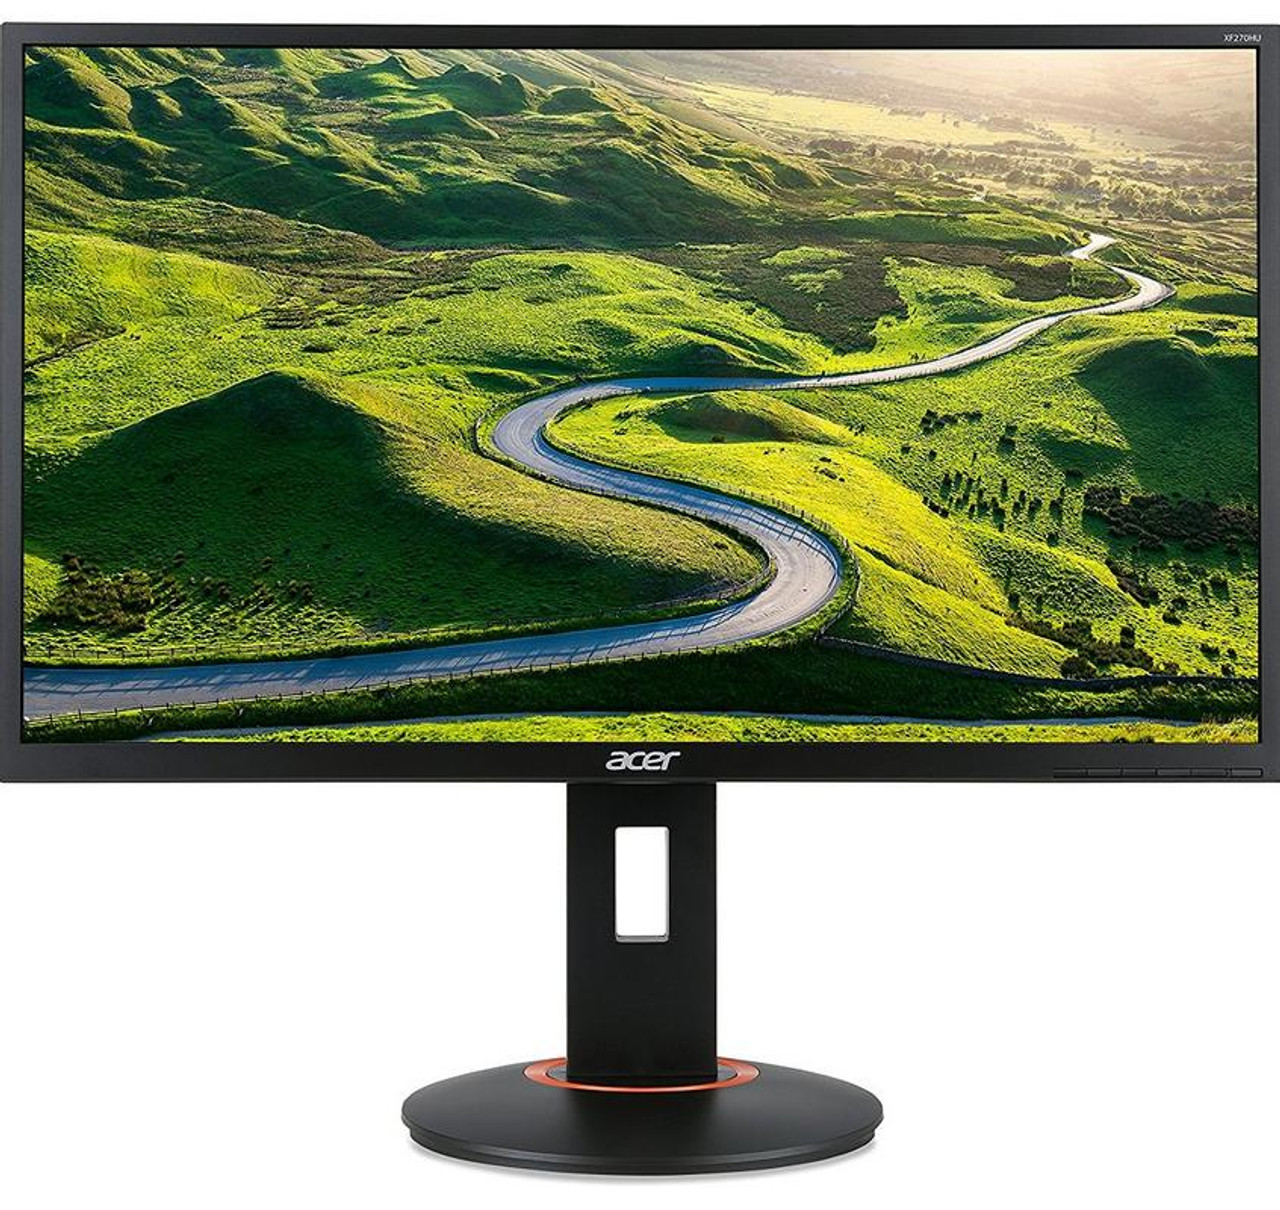 Acer Widescreen Monitor FHD Free Sync 144Hz 1ms XF270H Bbmiiprzx